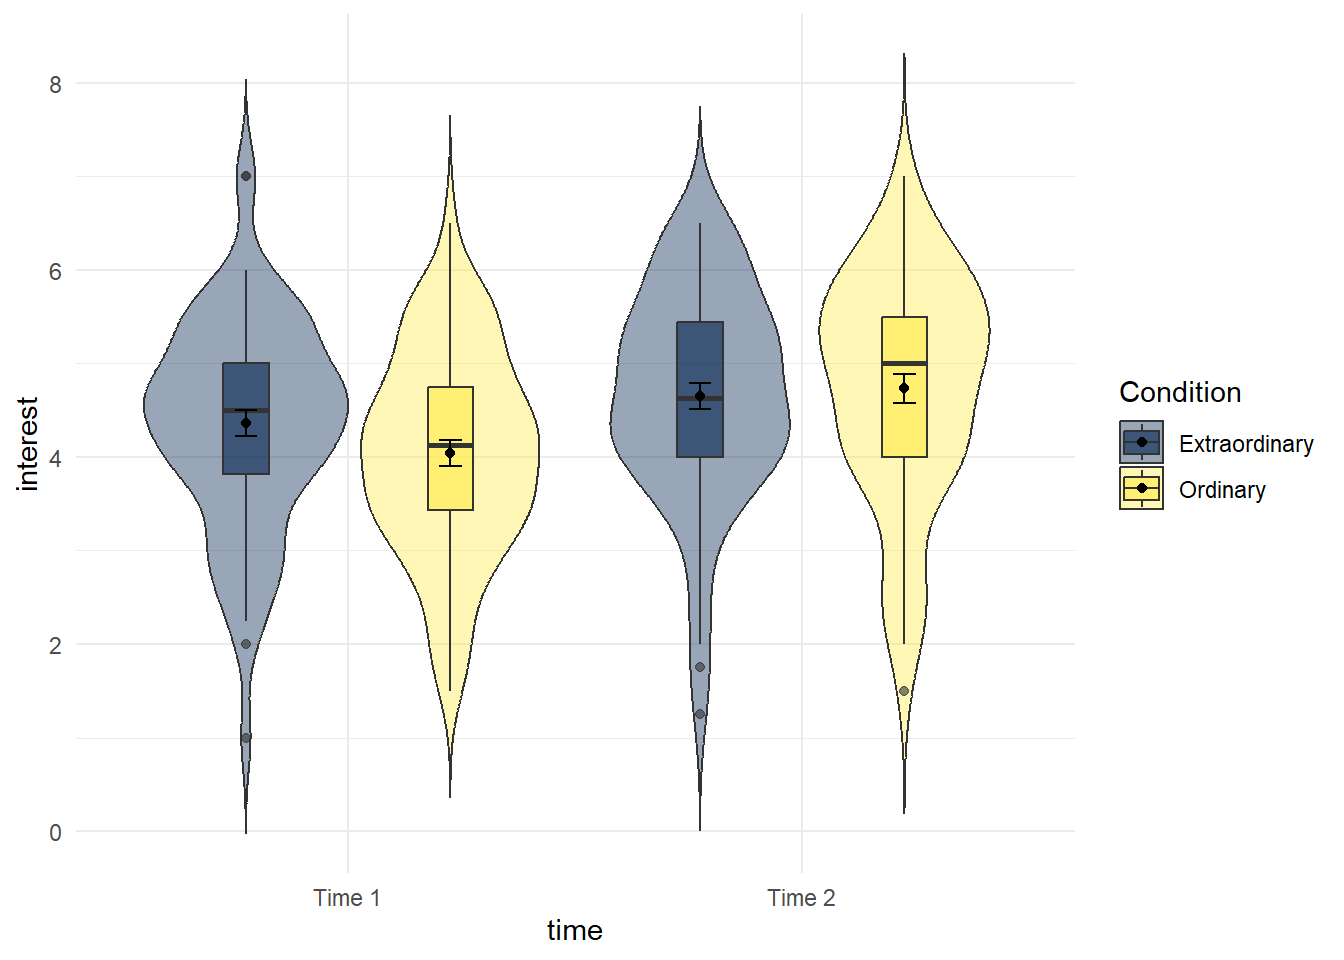 Violin-boxplot by condition and time